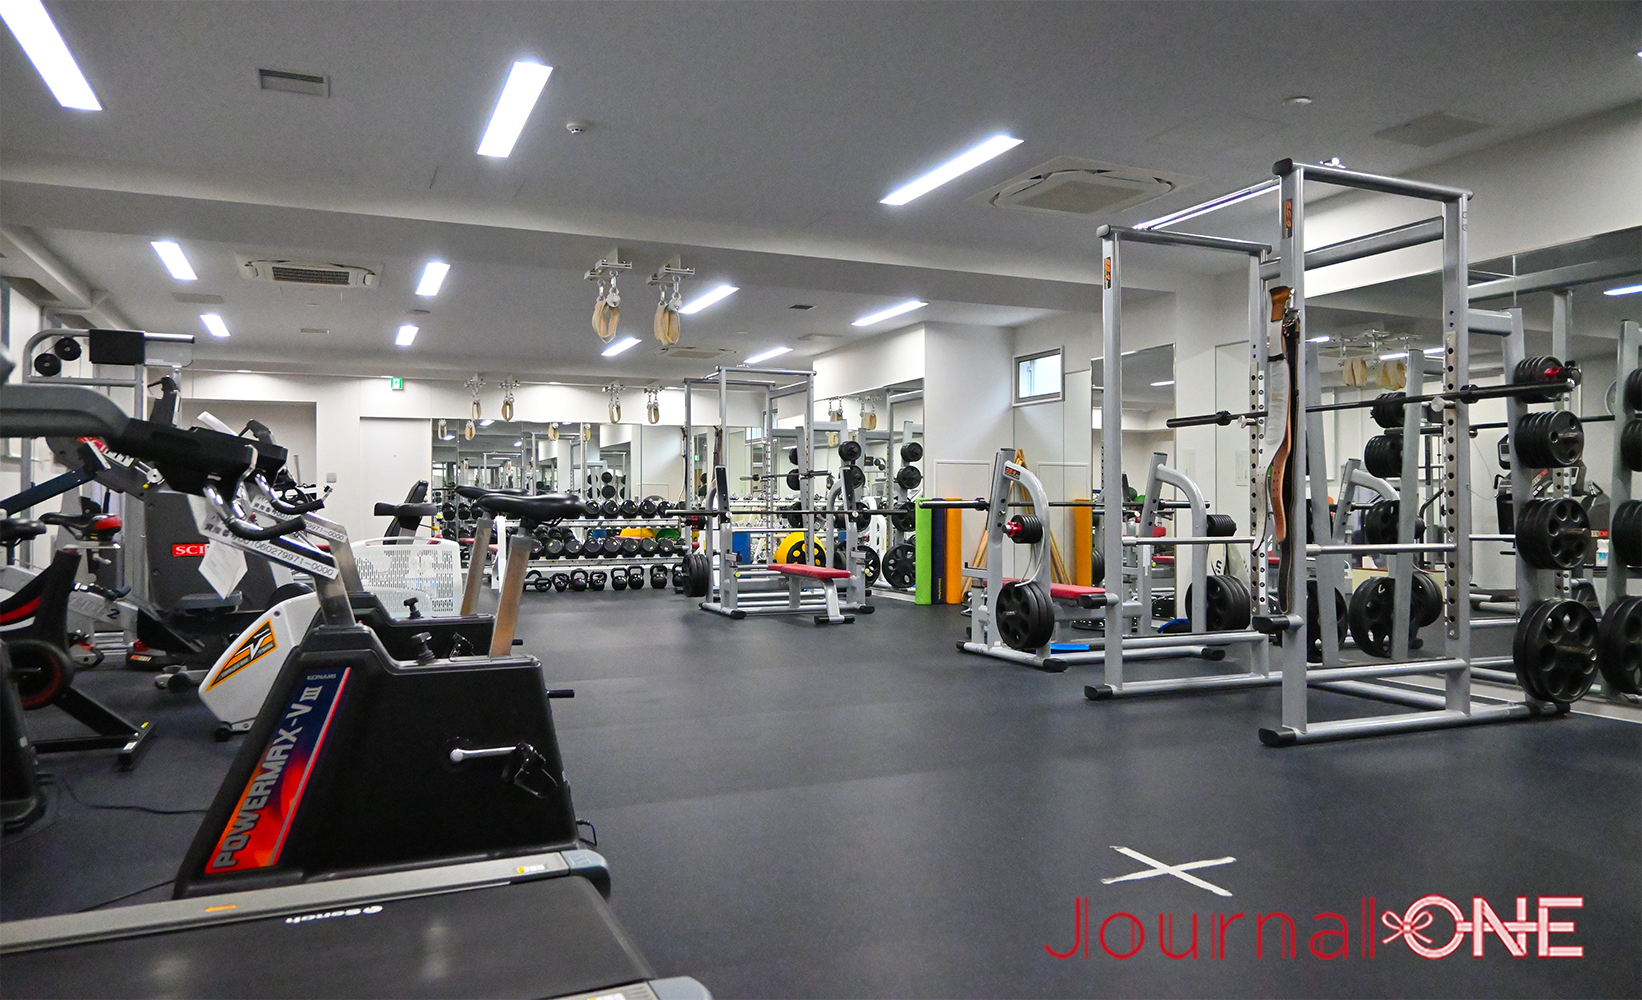 Journal-ONE | The training room of Sousi dojo has good facilities.